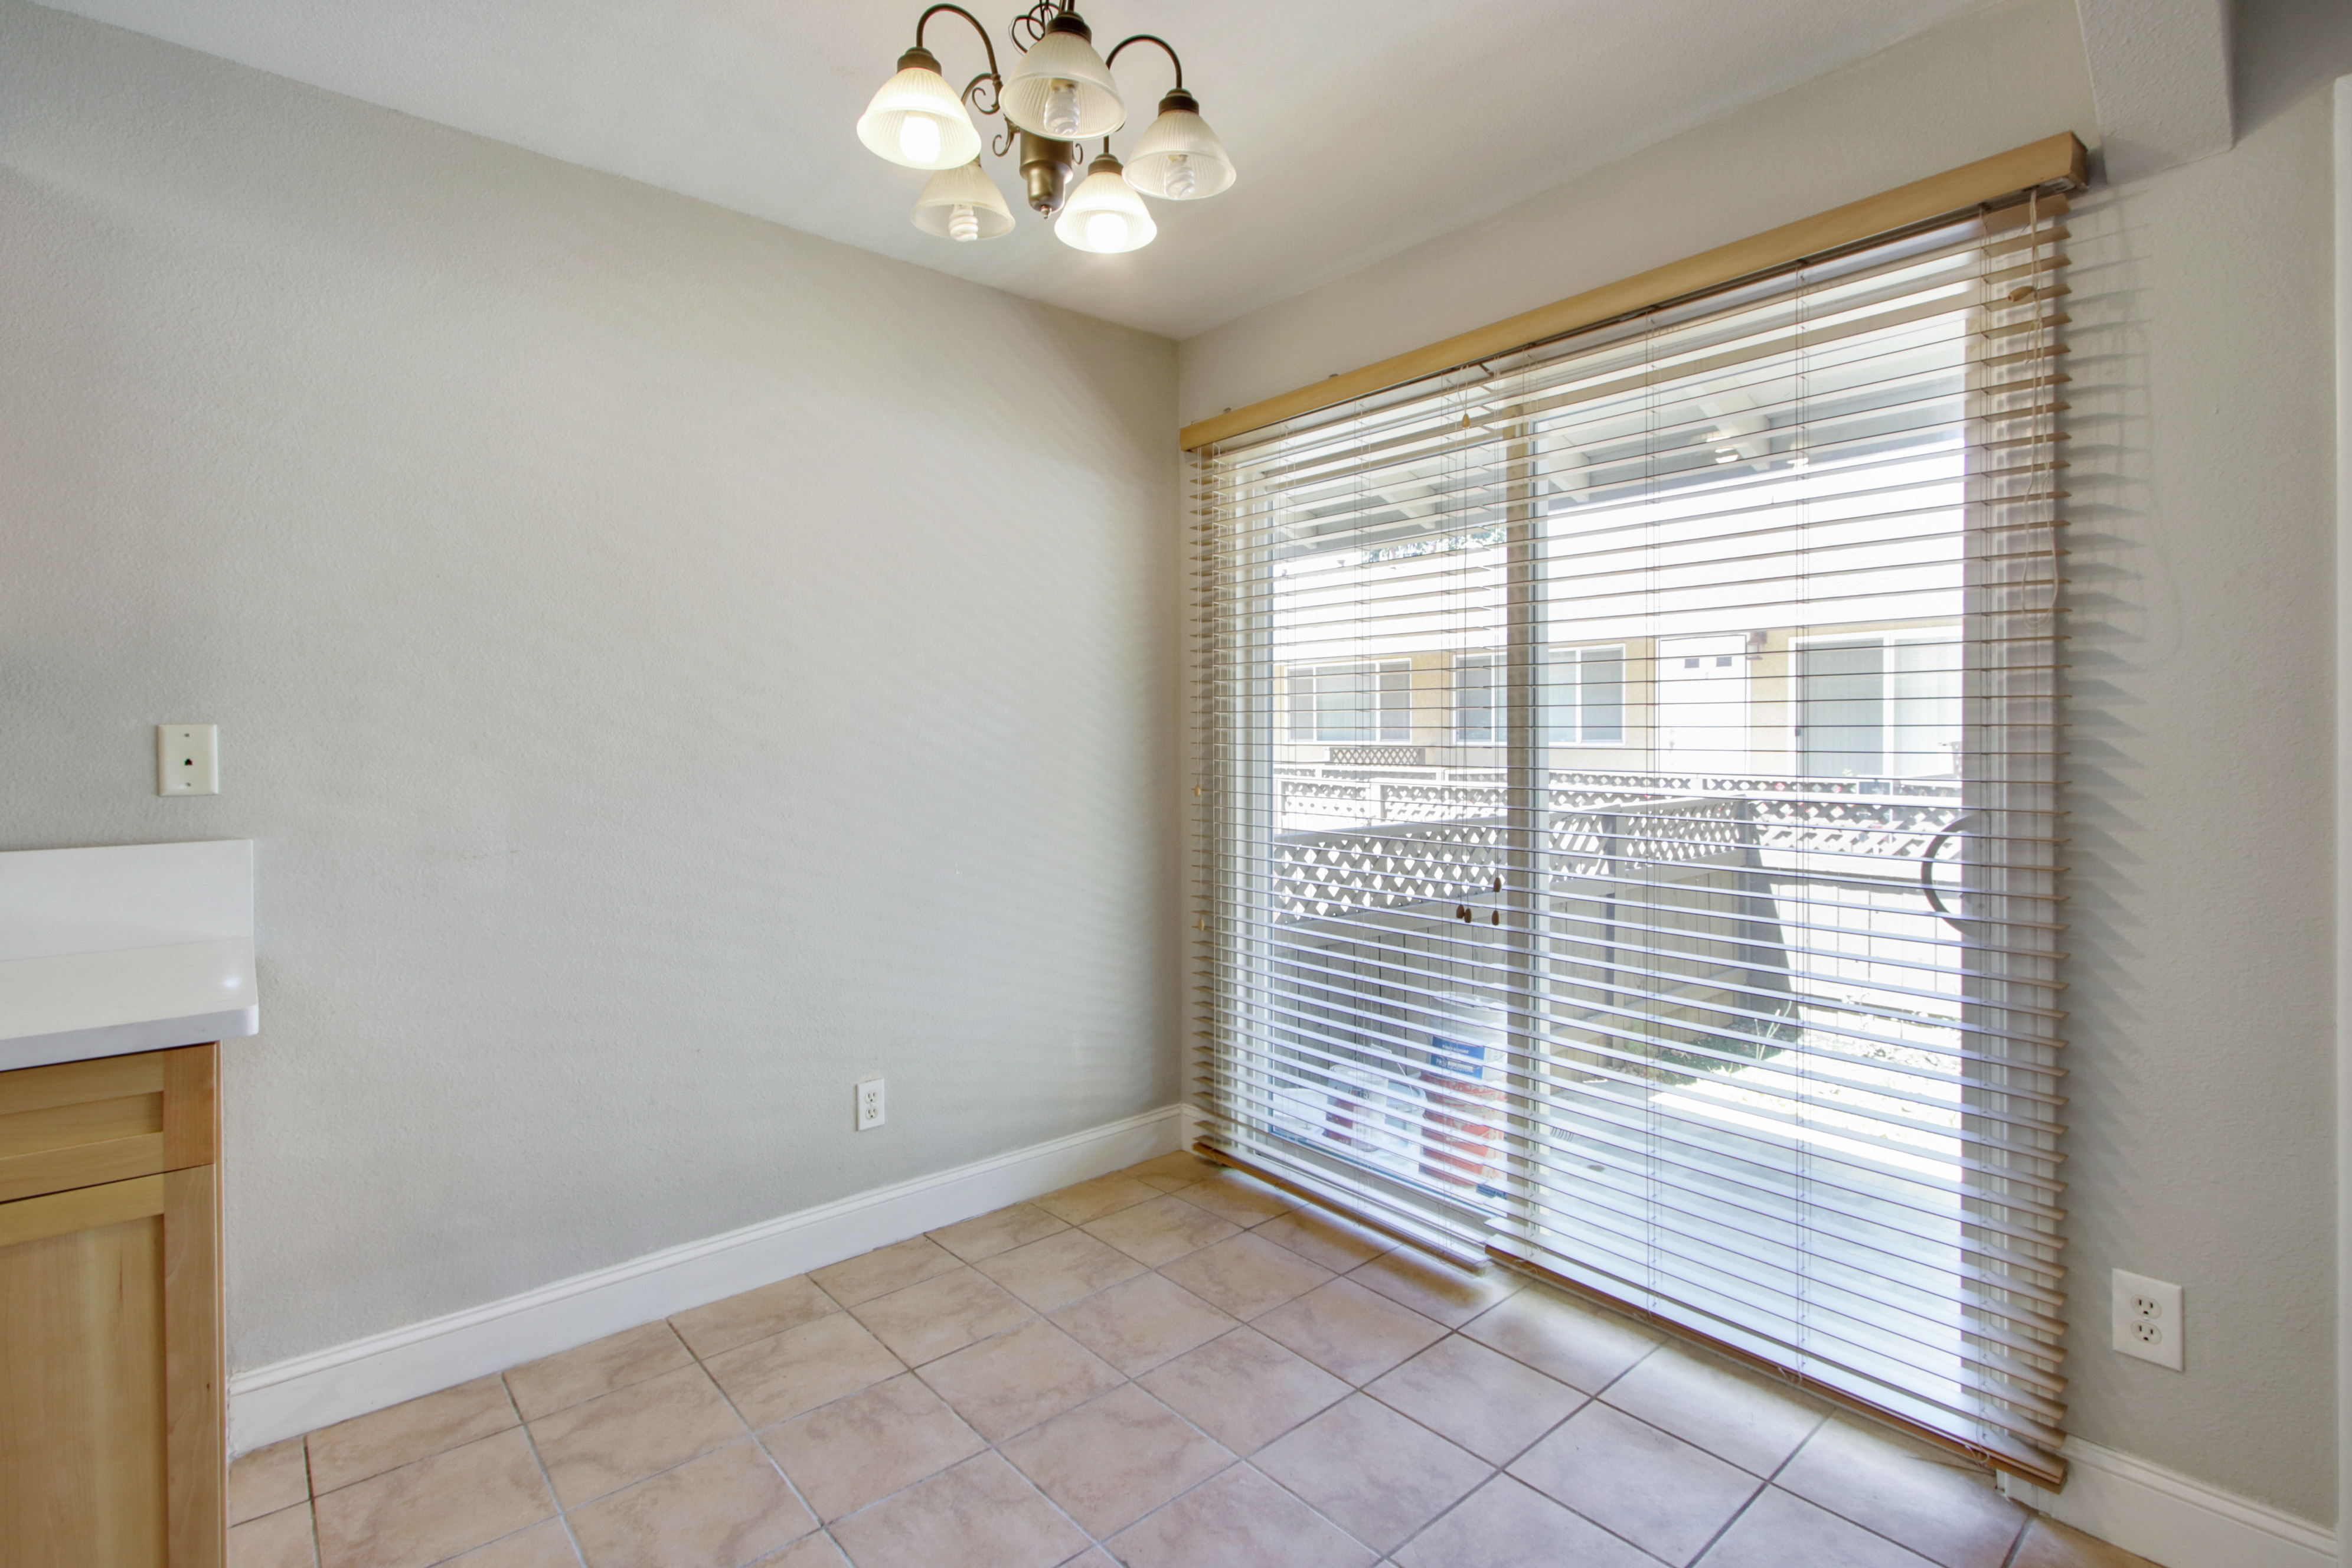 5001 Bremner Lane Unit 1 - Sacramento  -  presented by James Tan MBA Broker/Realtor - Bethany Real Estate and Investments - One of the best real estate agent in Elk Grove